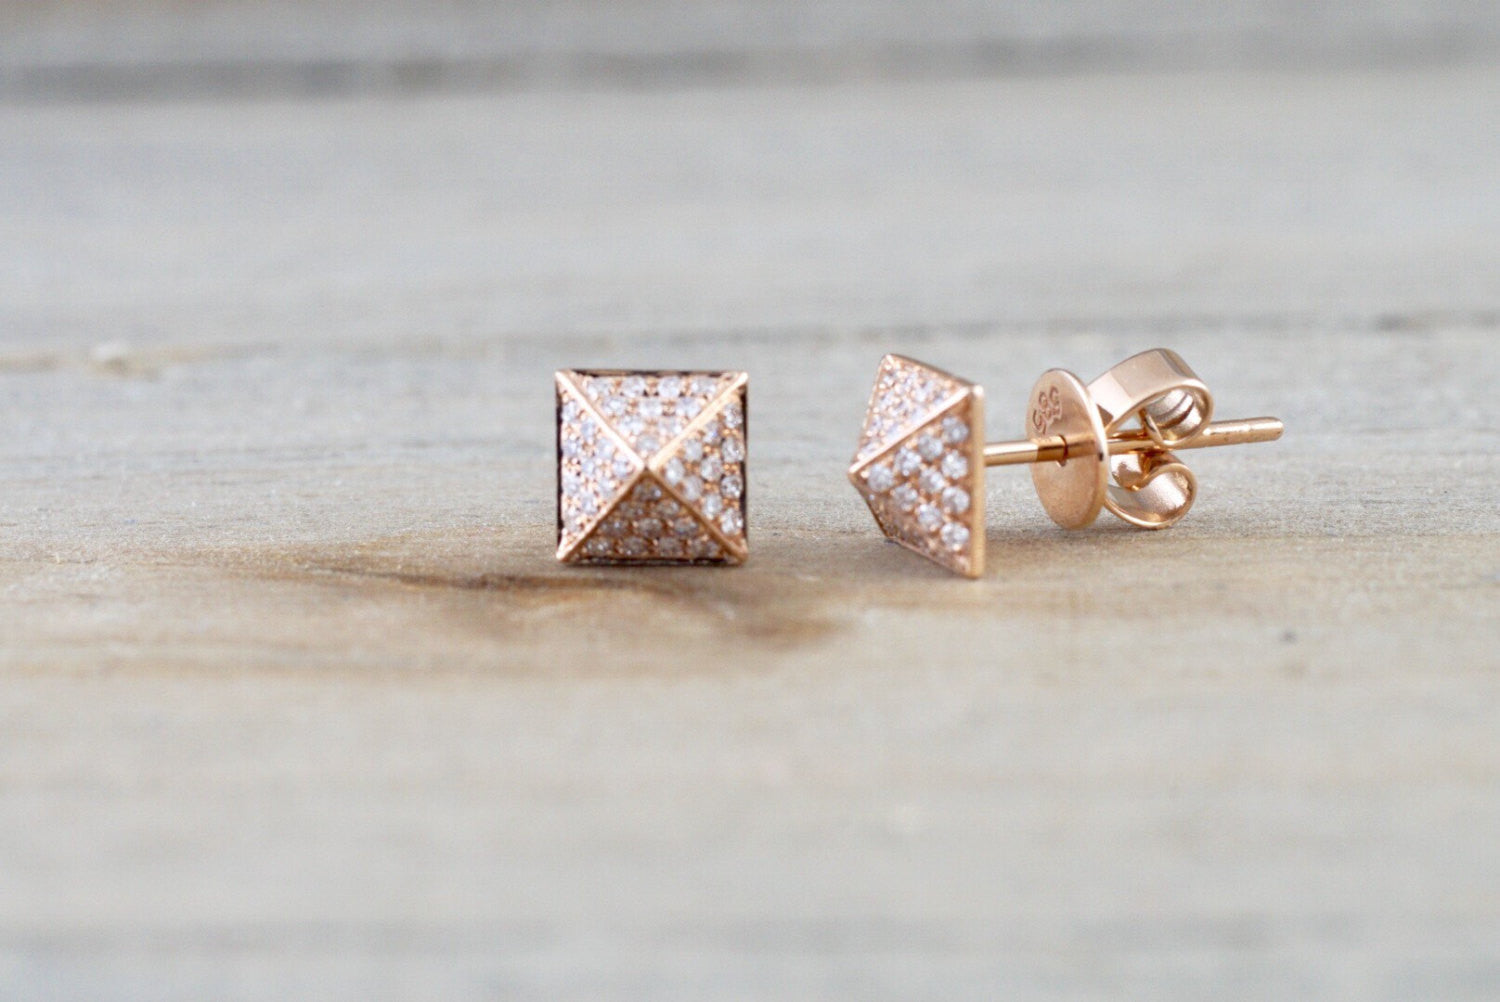 Marble Crystal Stud Earrings -Buy Crystal Earrings Online Cheap, Shop From  The Latest Collection Of Earrings For Women & Girls Online. Buy Studs, Ear  Cuff, Drop & More Earrings At Best Price |